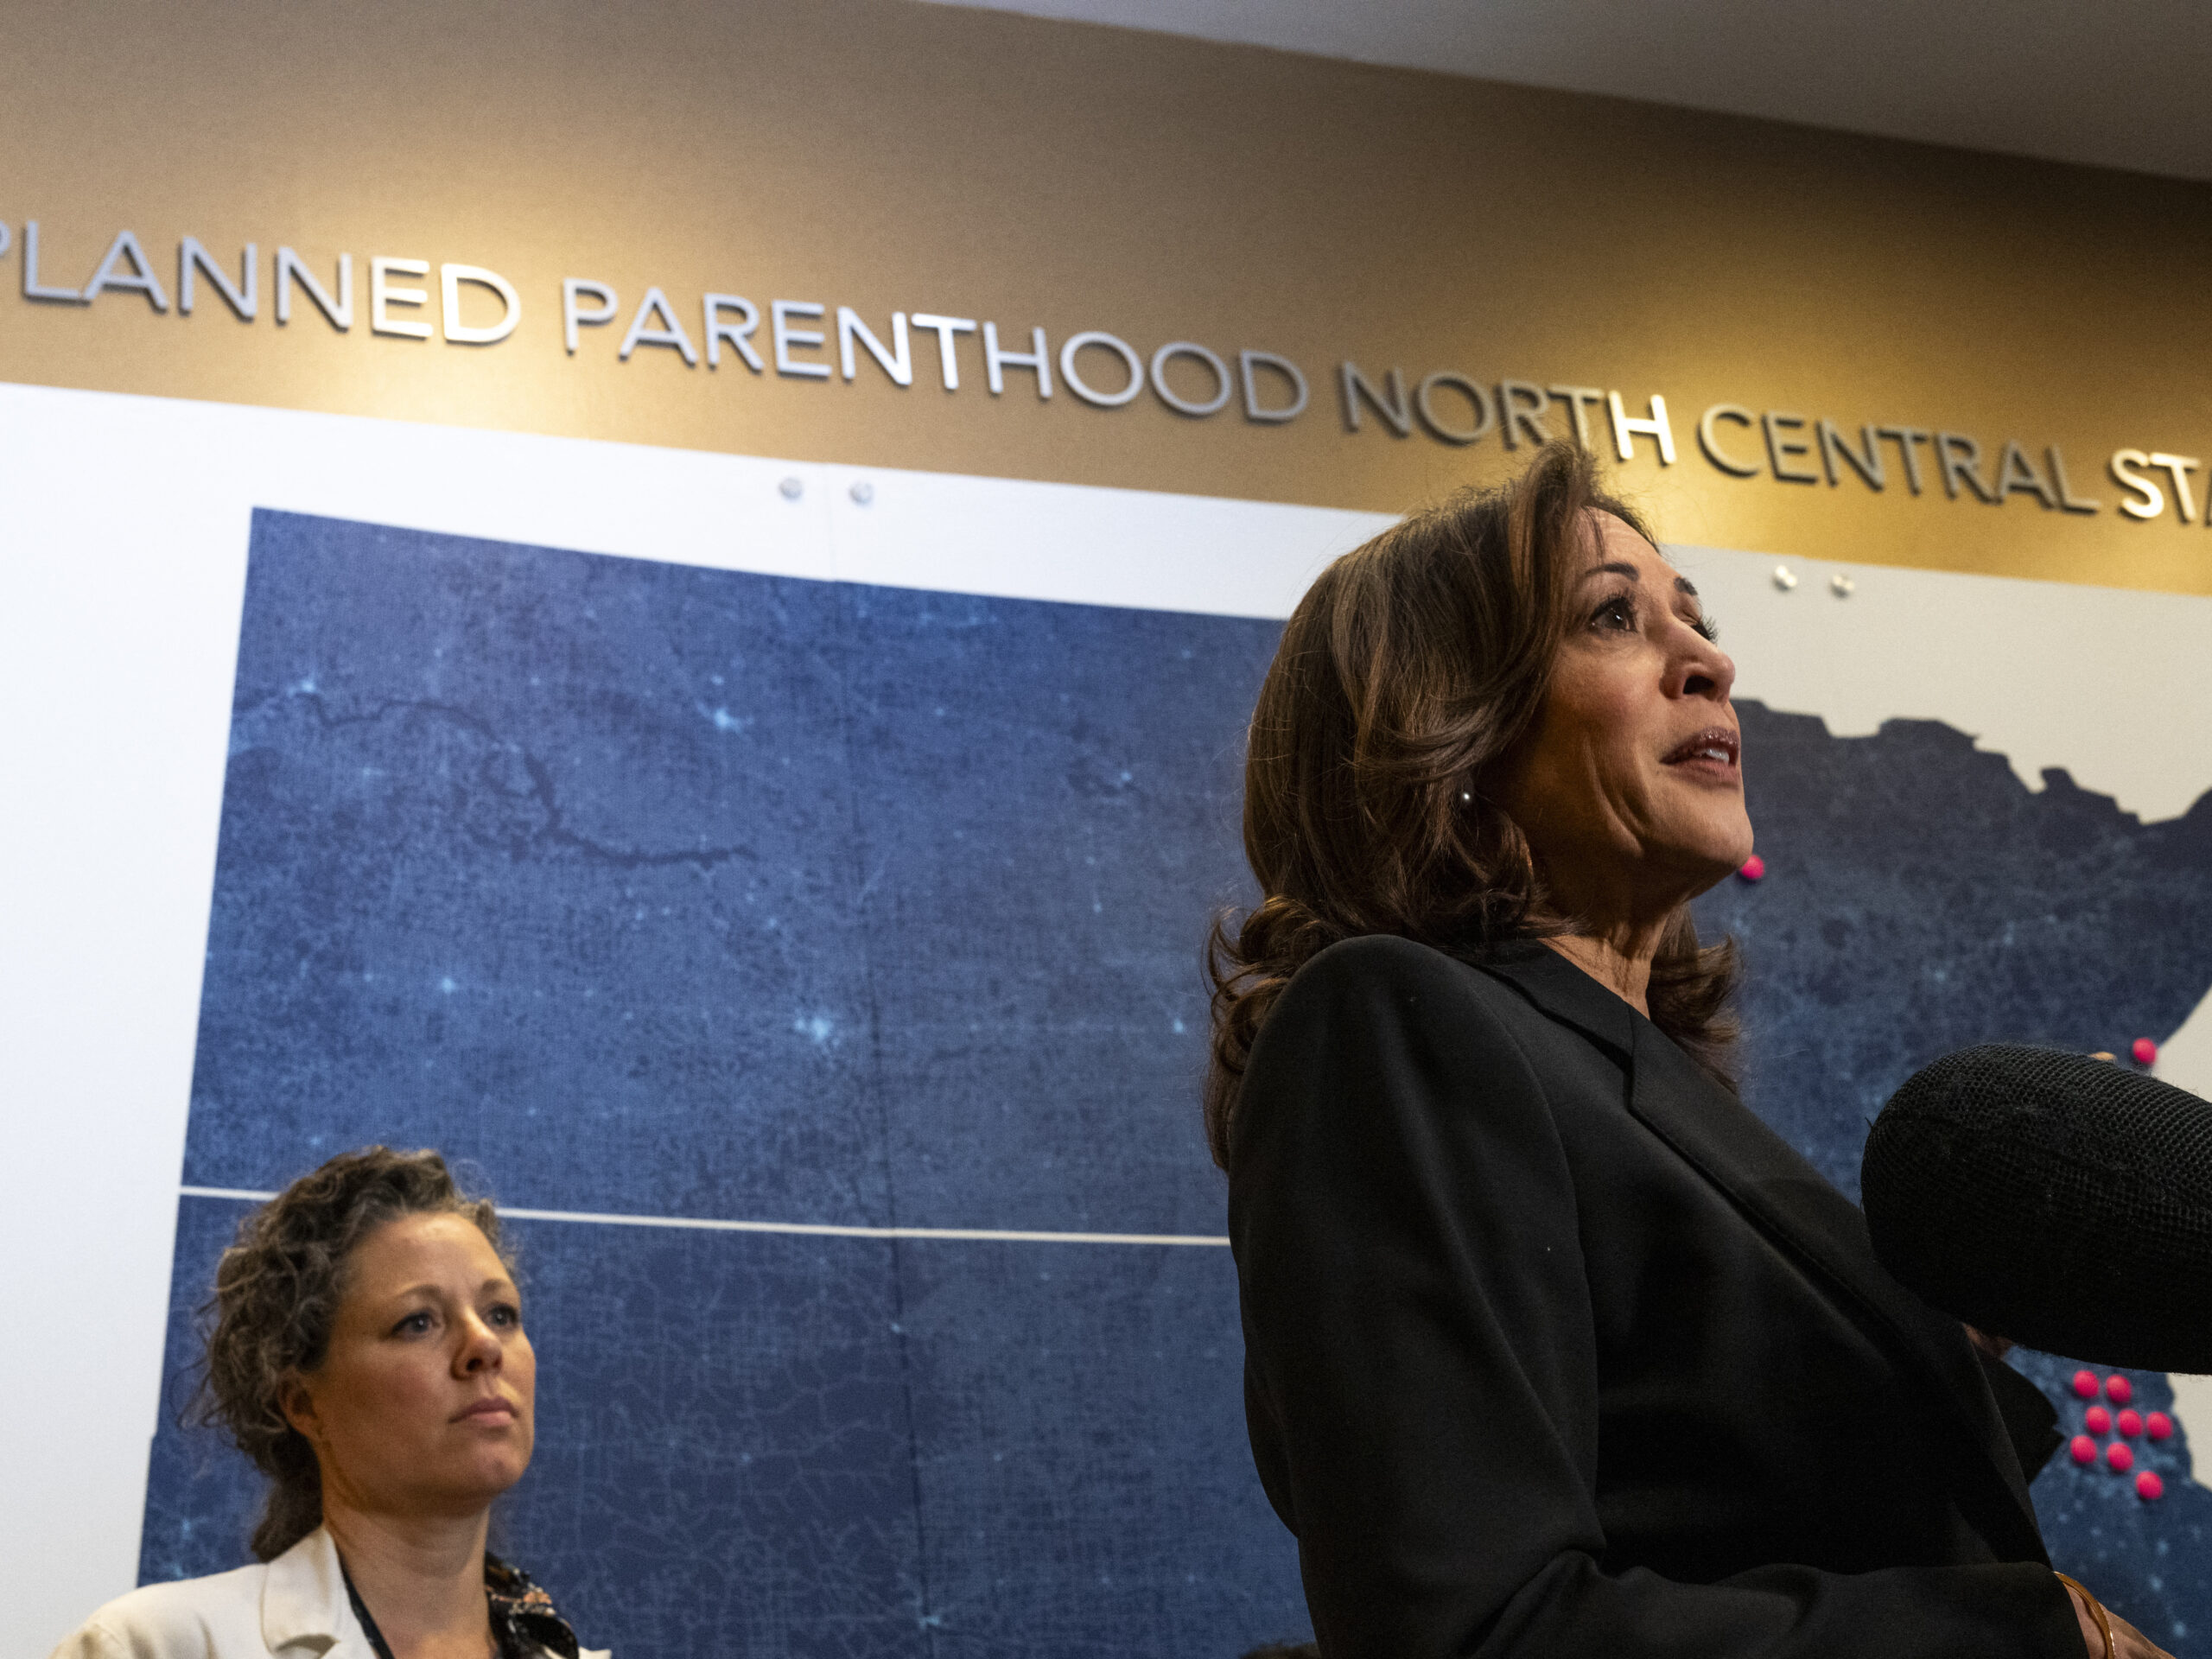 Harris visited an abortion clinic, a first for any president or vice president